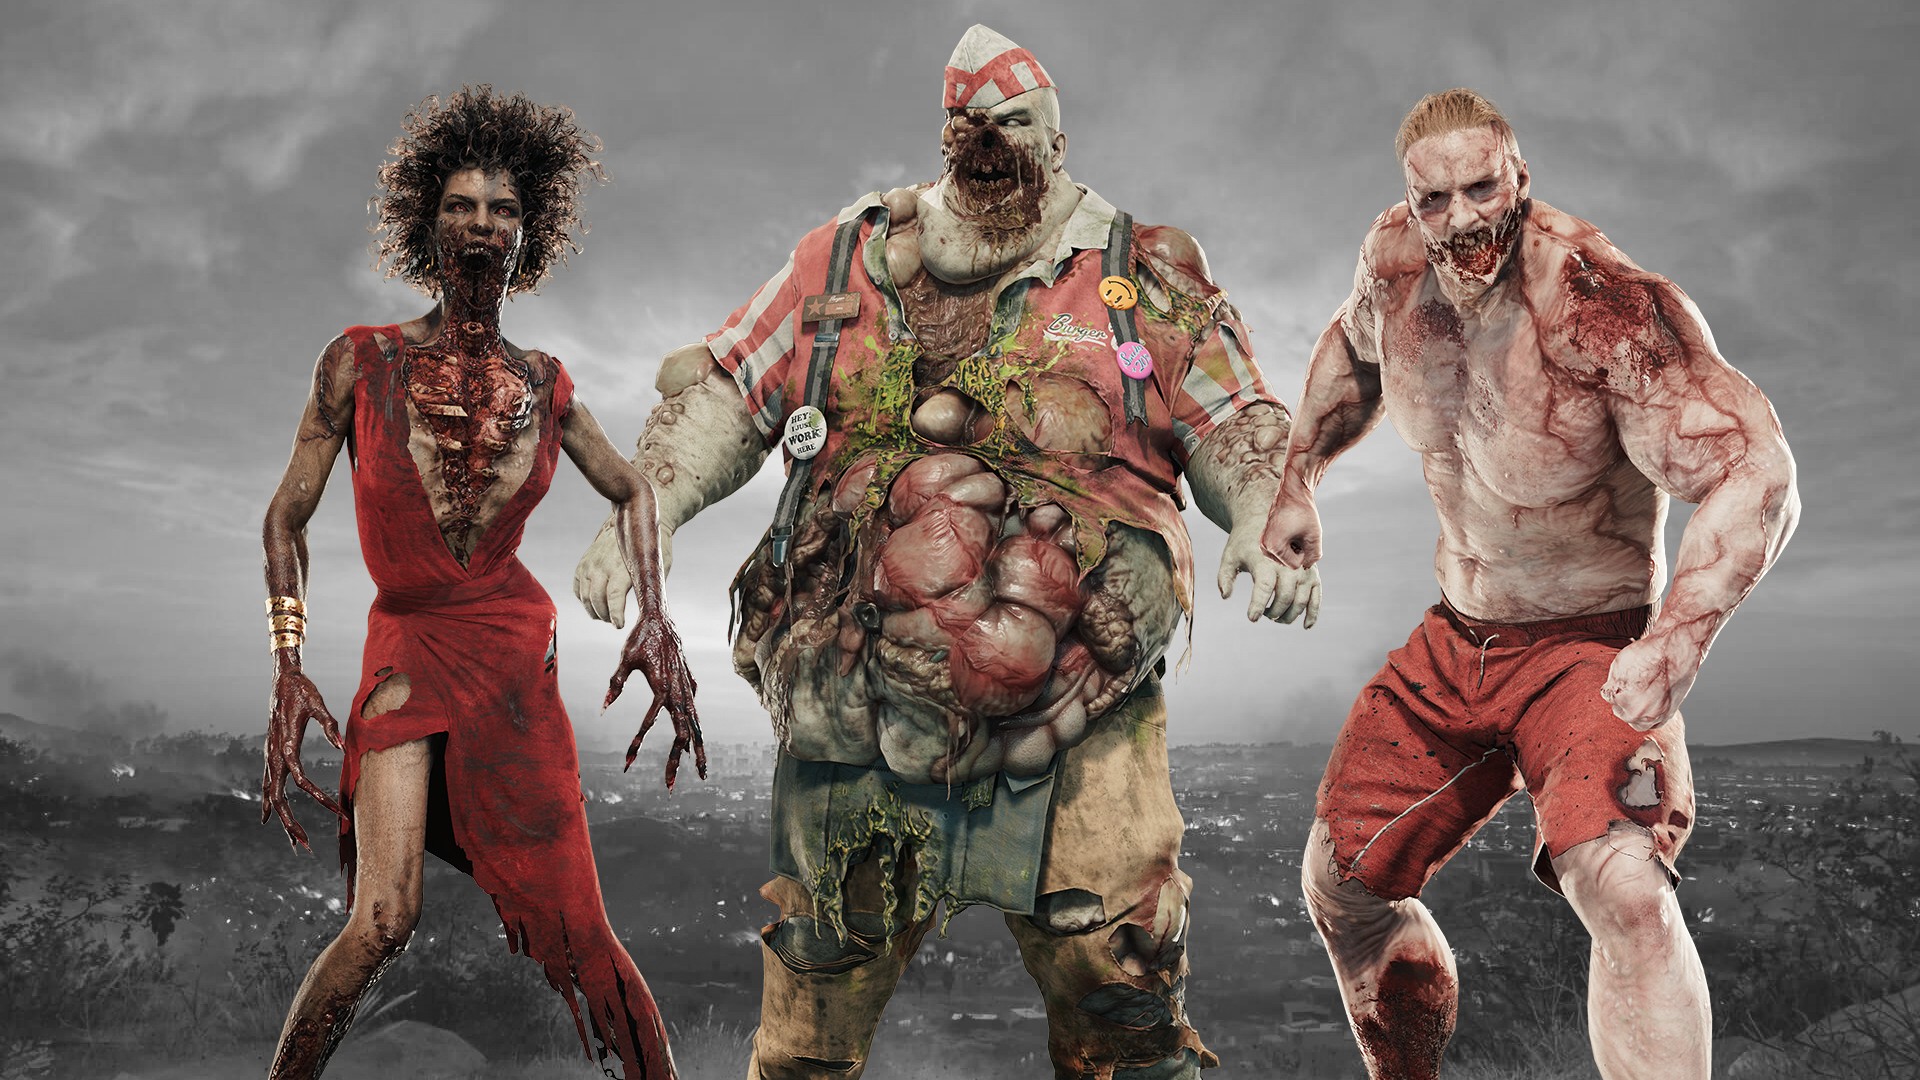 Dead Island 2 release date, news, gameplay, story, and more